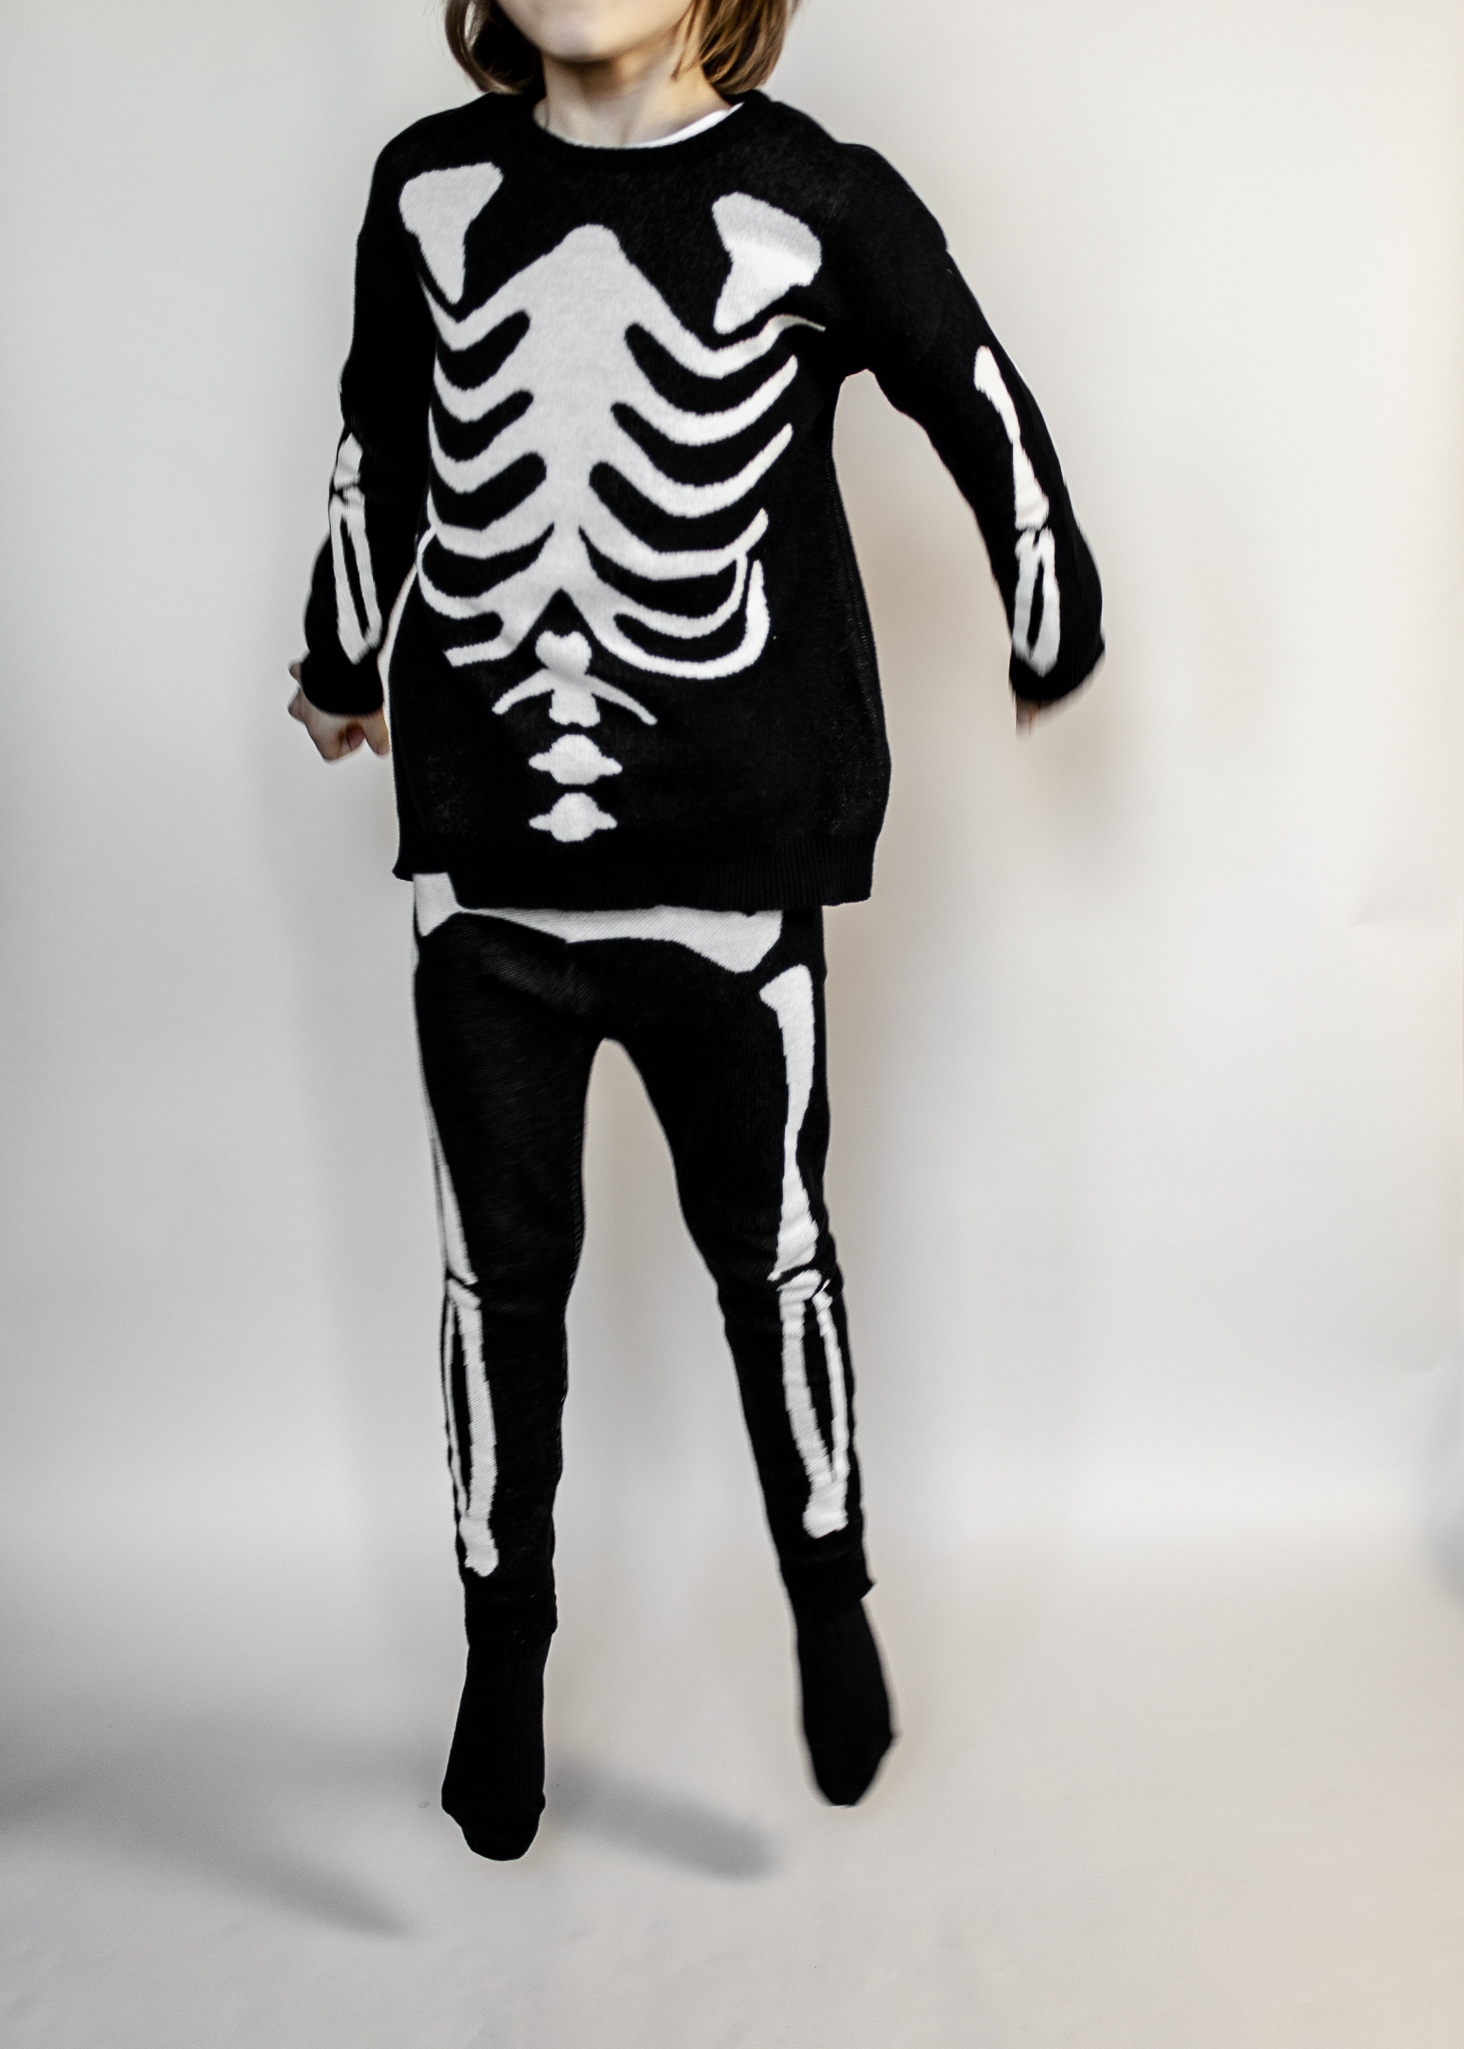                                                                                                                       Knit Tracked Suit Sweater - Skeleton